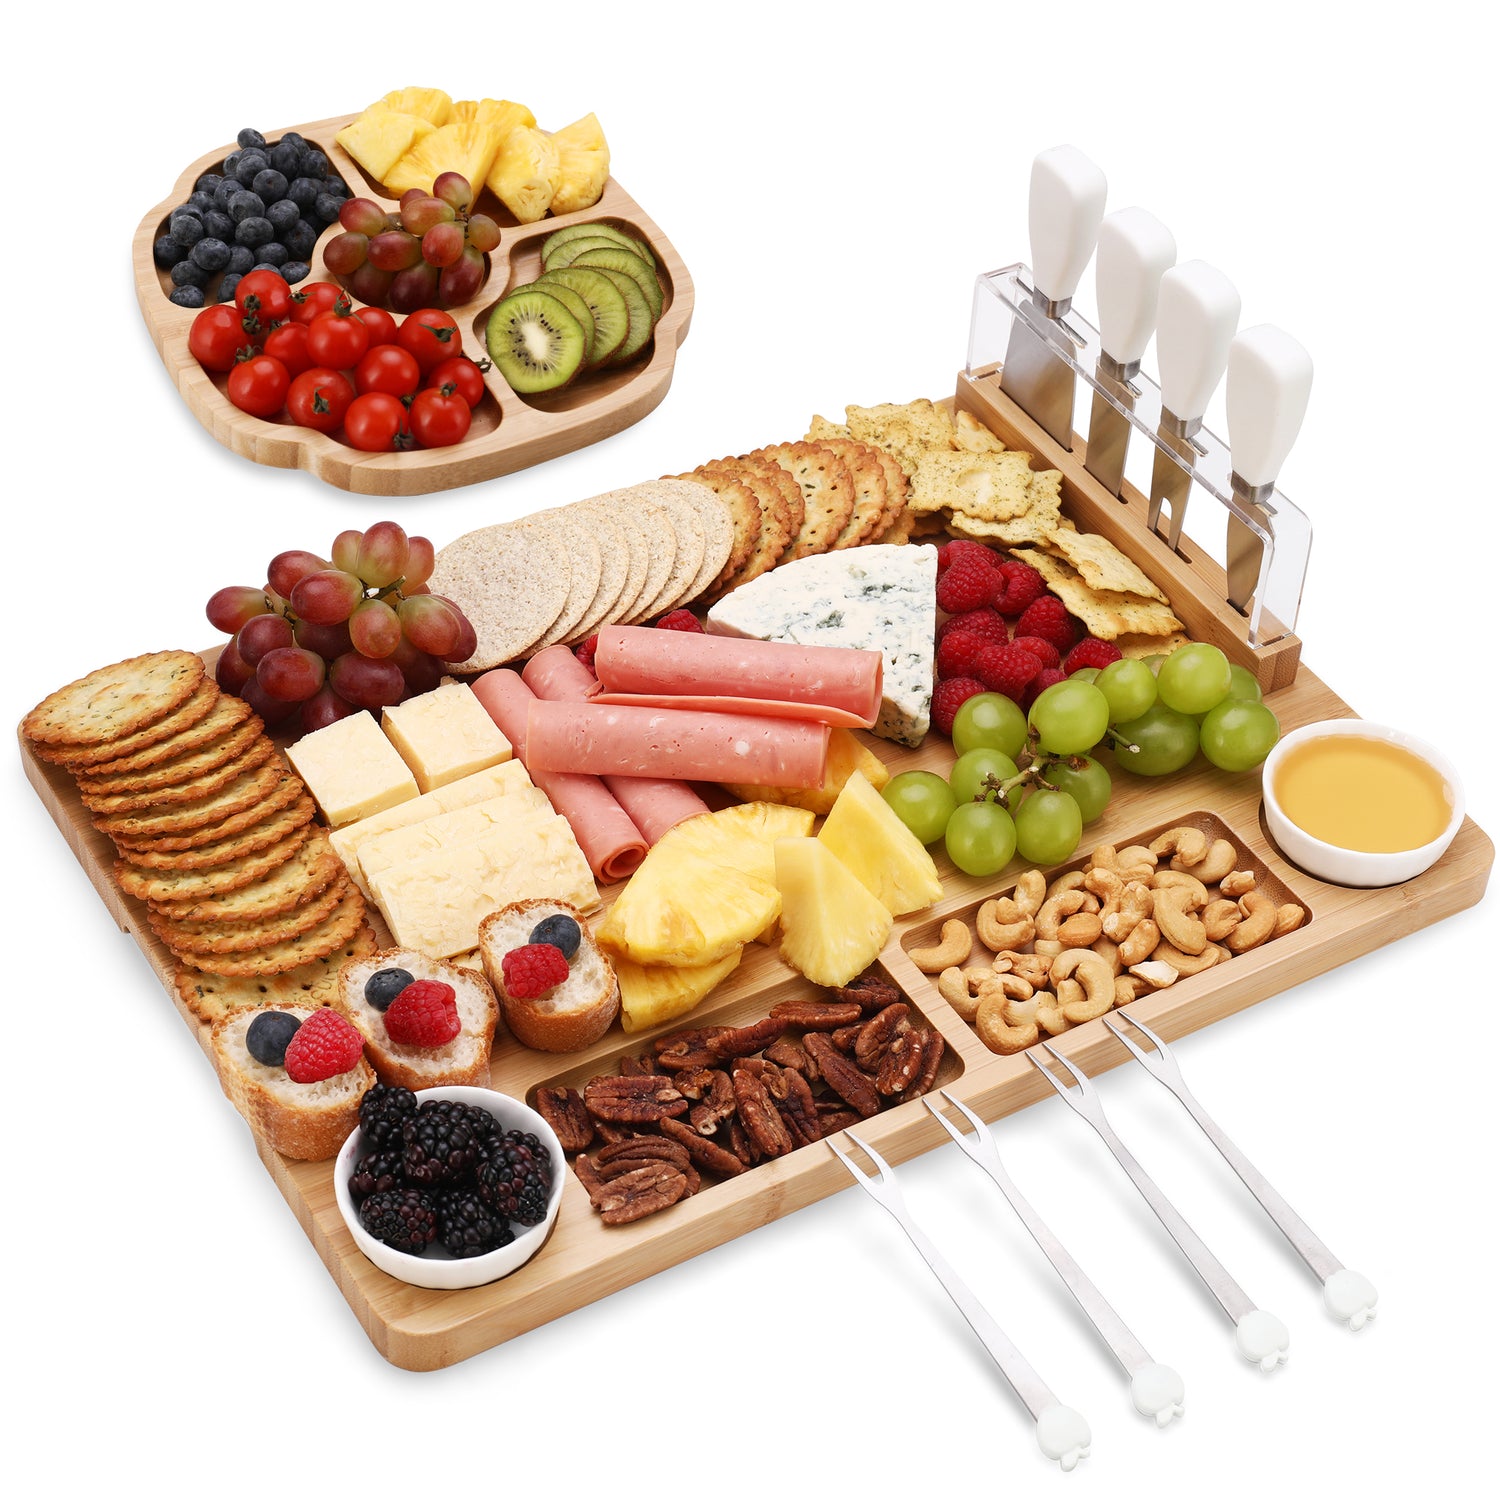 Hecef Lager Charcuterie Board Set of 13, A bamboo Cheese Board & Snack Tray, 2 Ceramic Bowls, 4 Server Forks, 4 Cheese Knives Set, Magnetic Knife Stand, Appetizer Cheese Platter Set Gifts - Hecef Kitchen